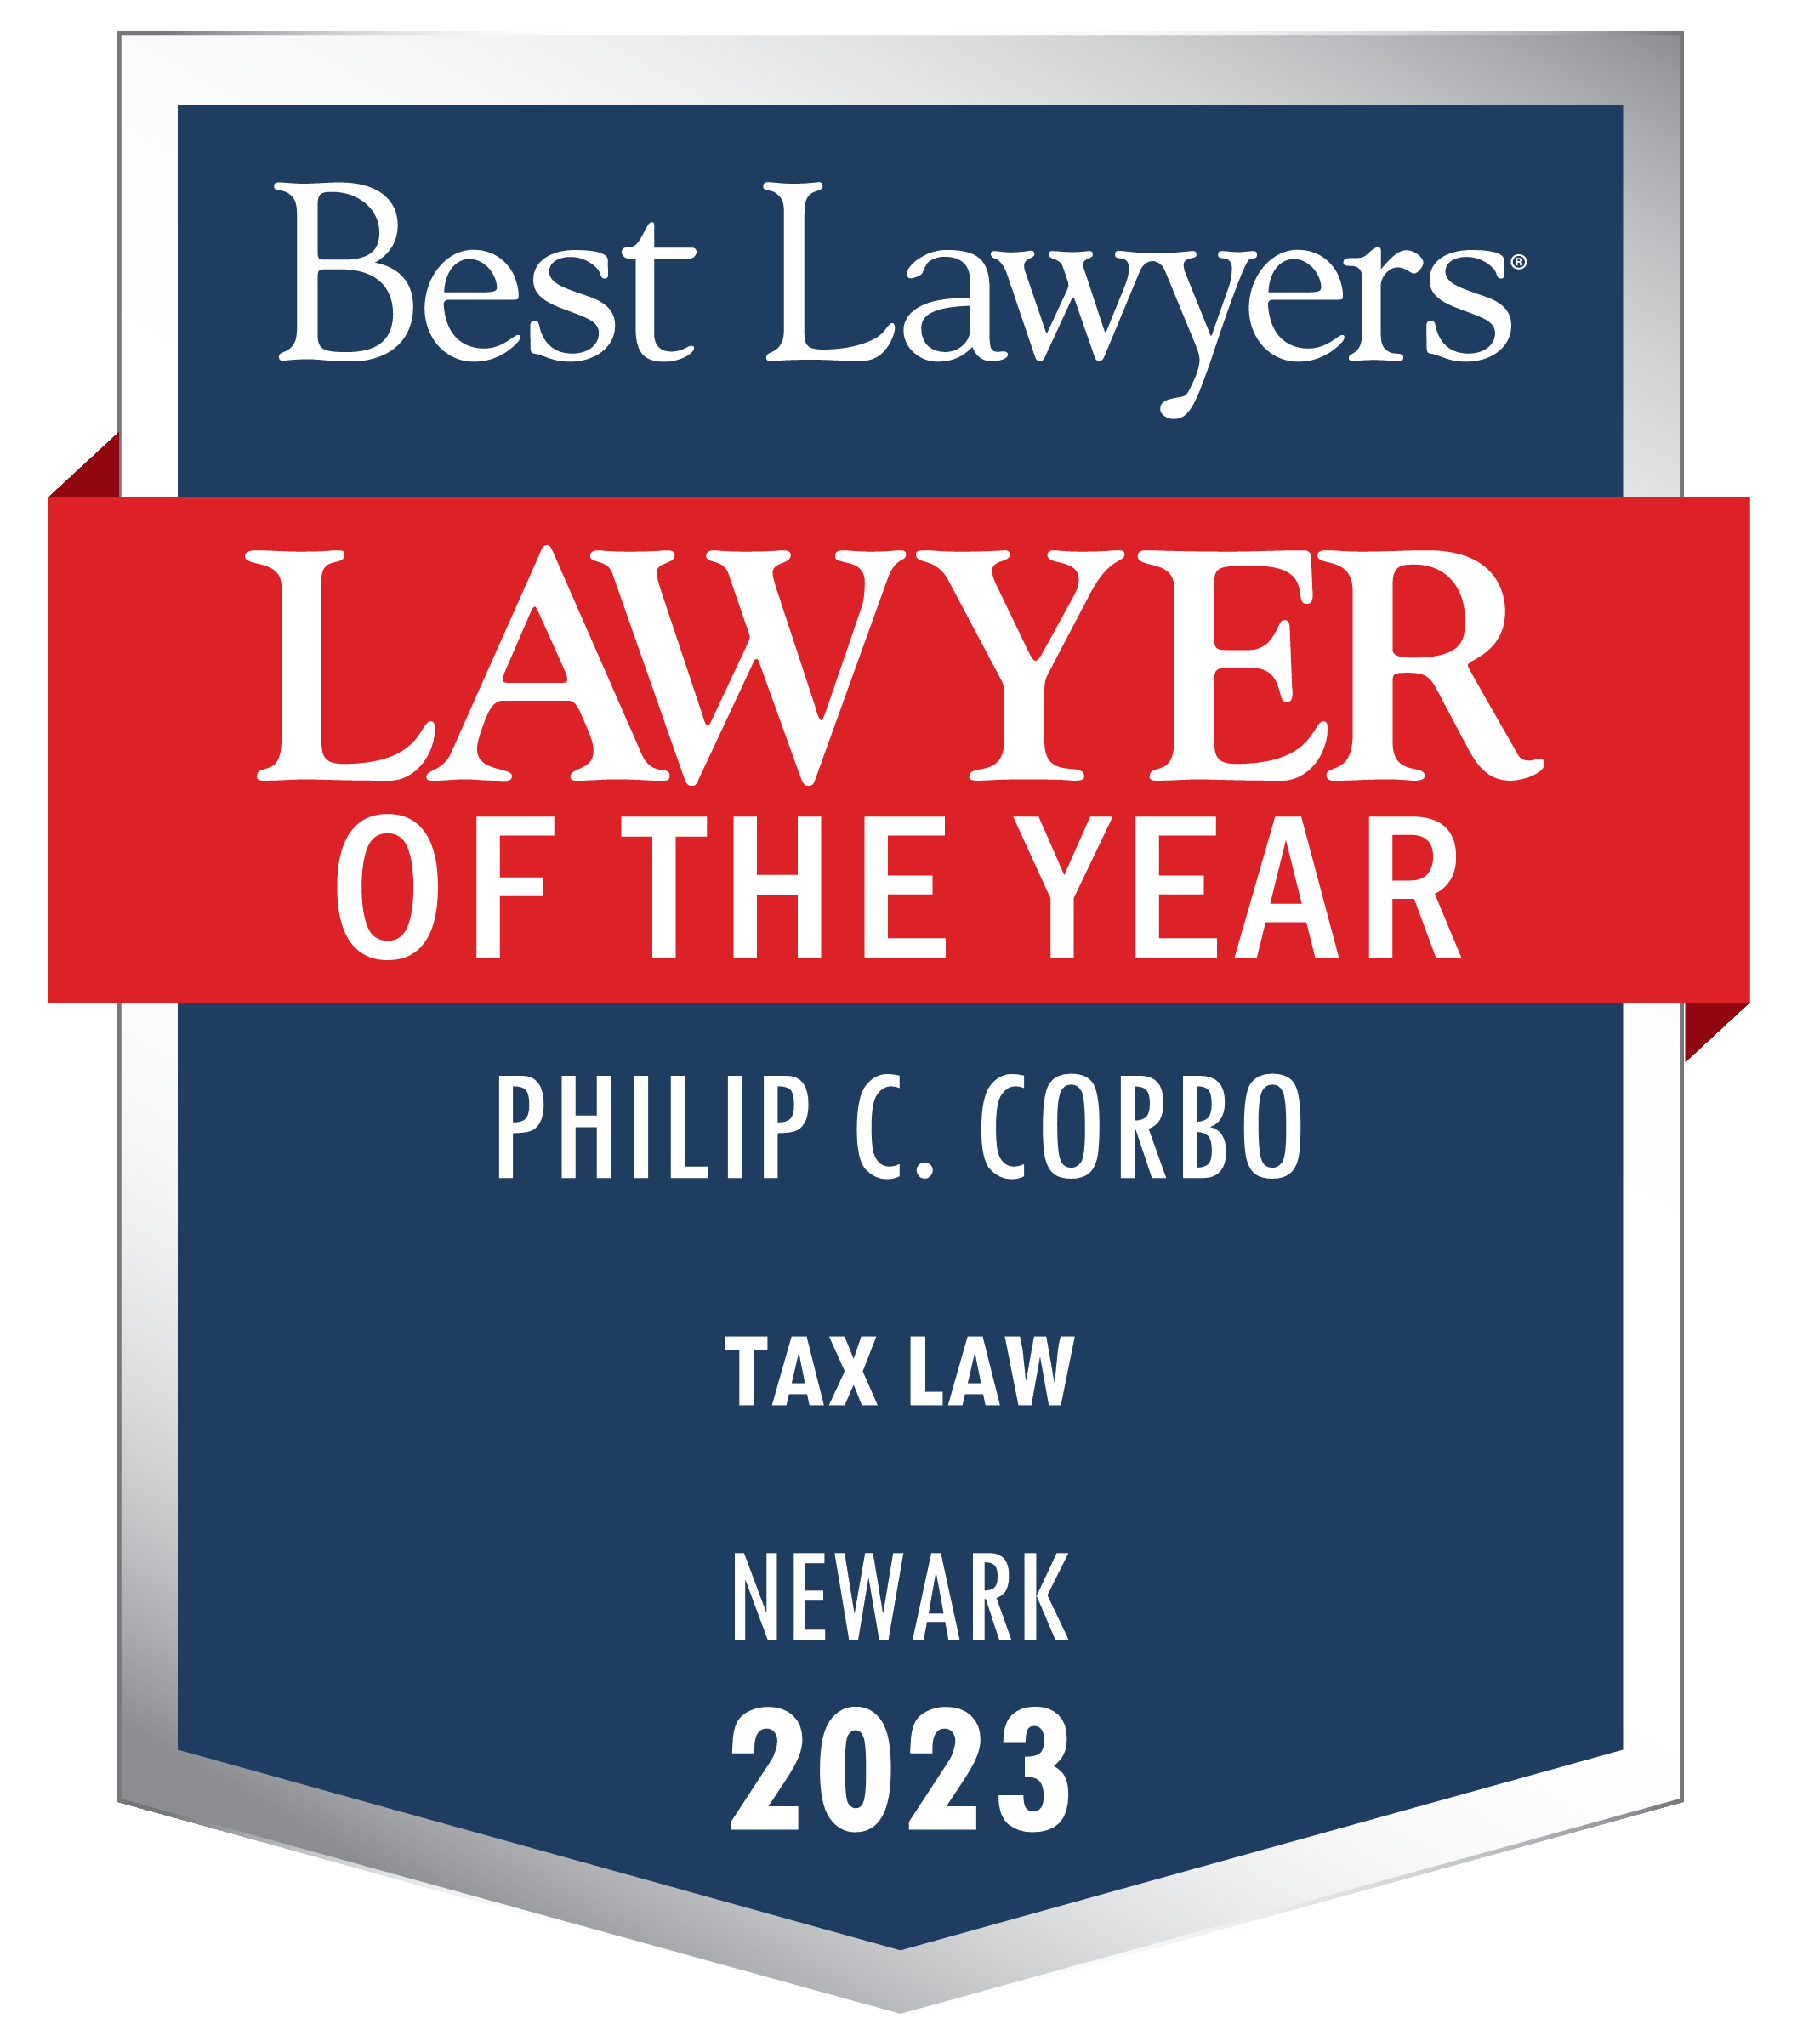 Best-Lawyers-_Lawyer-of-the-Year_-Contemporary-Logo.png